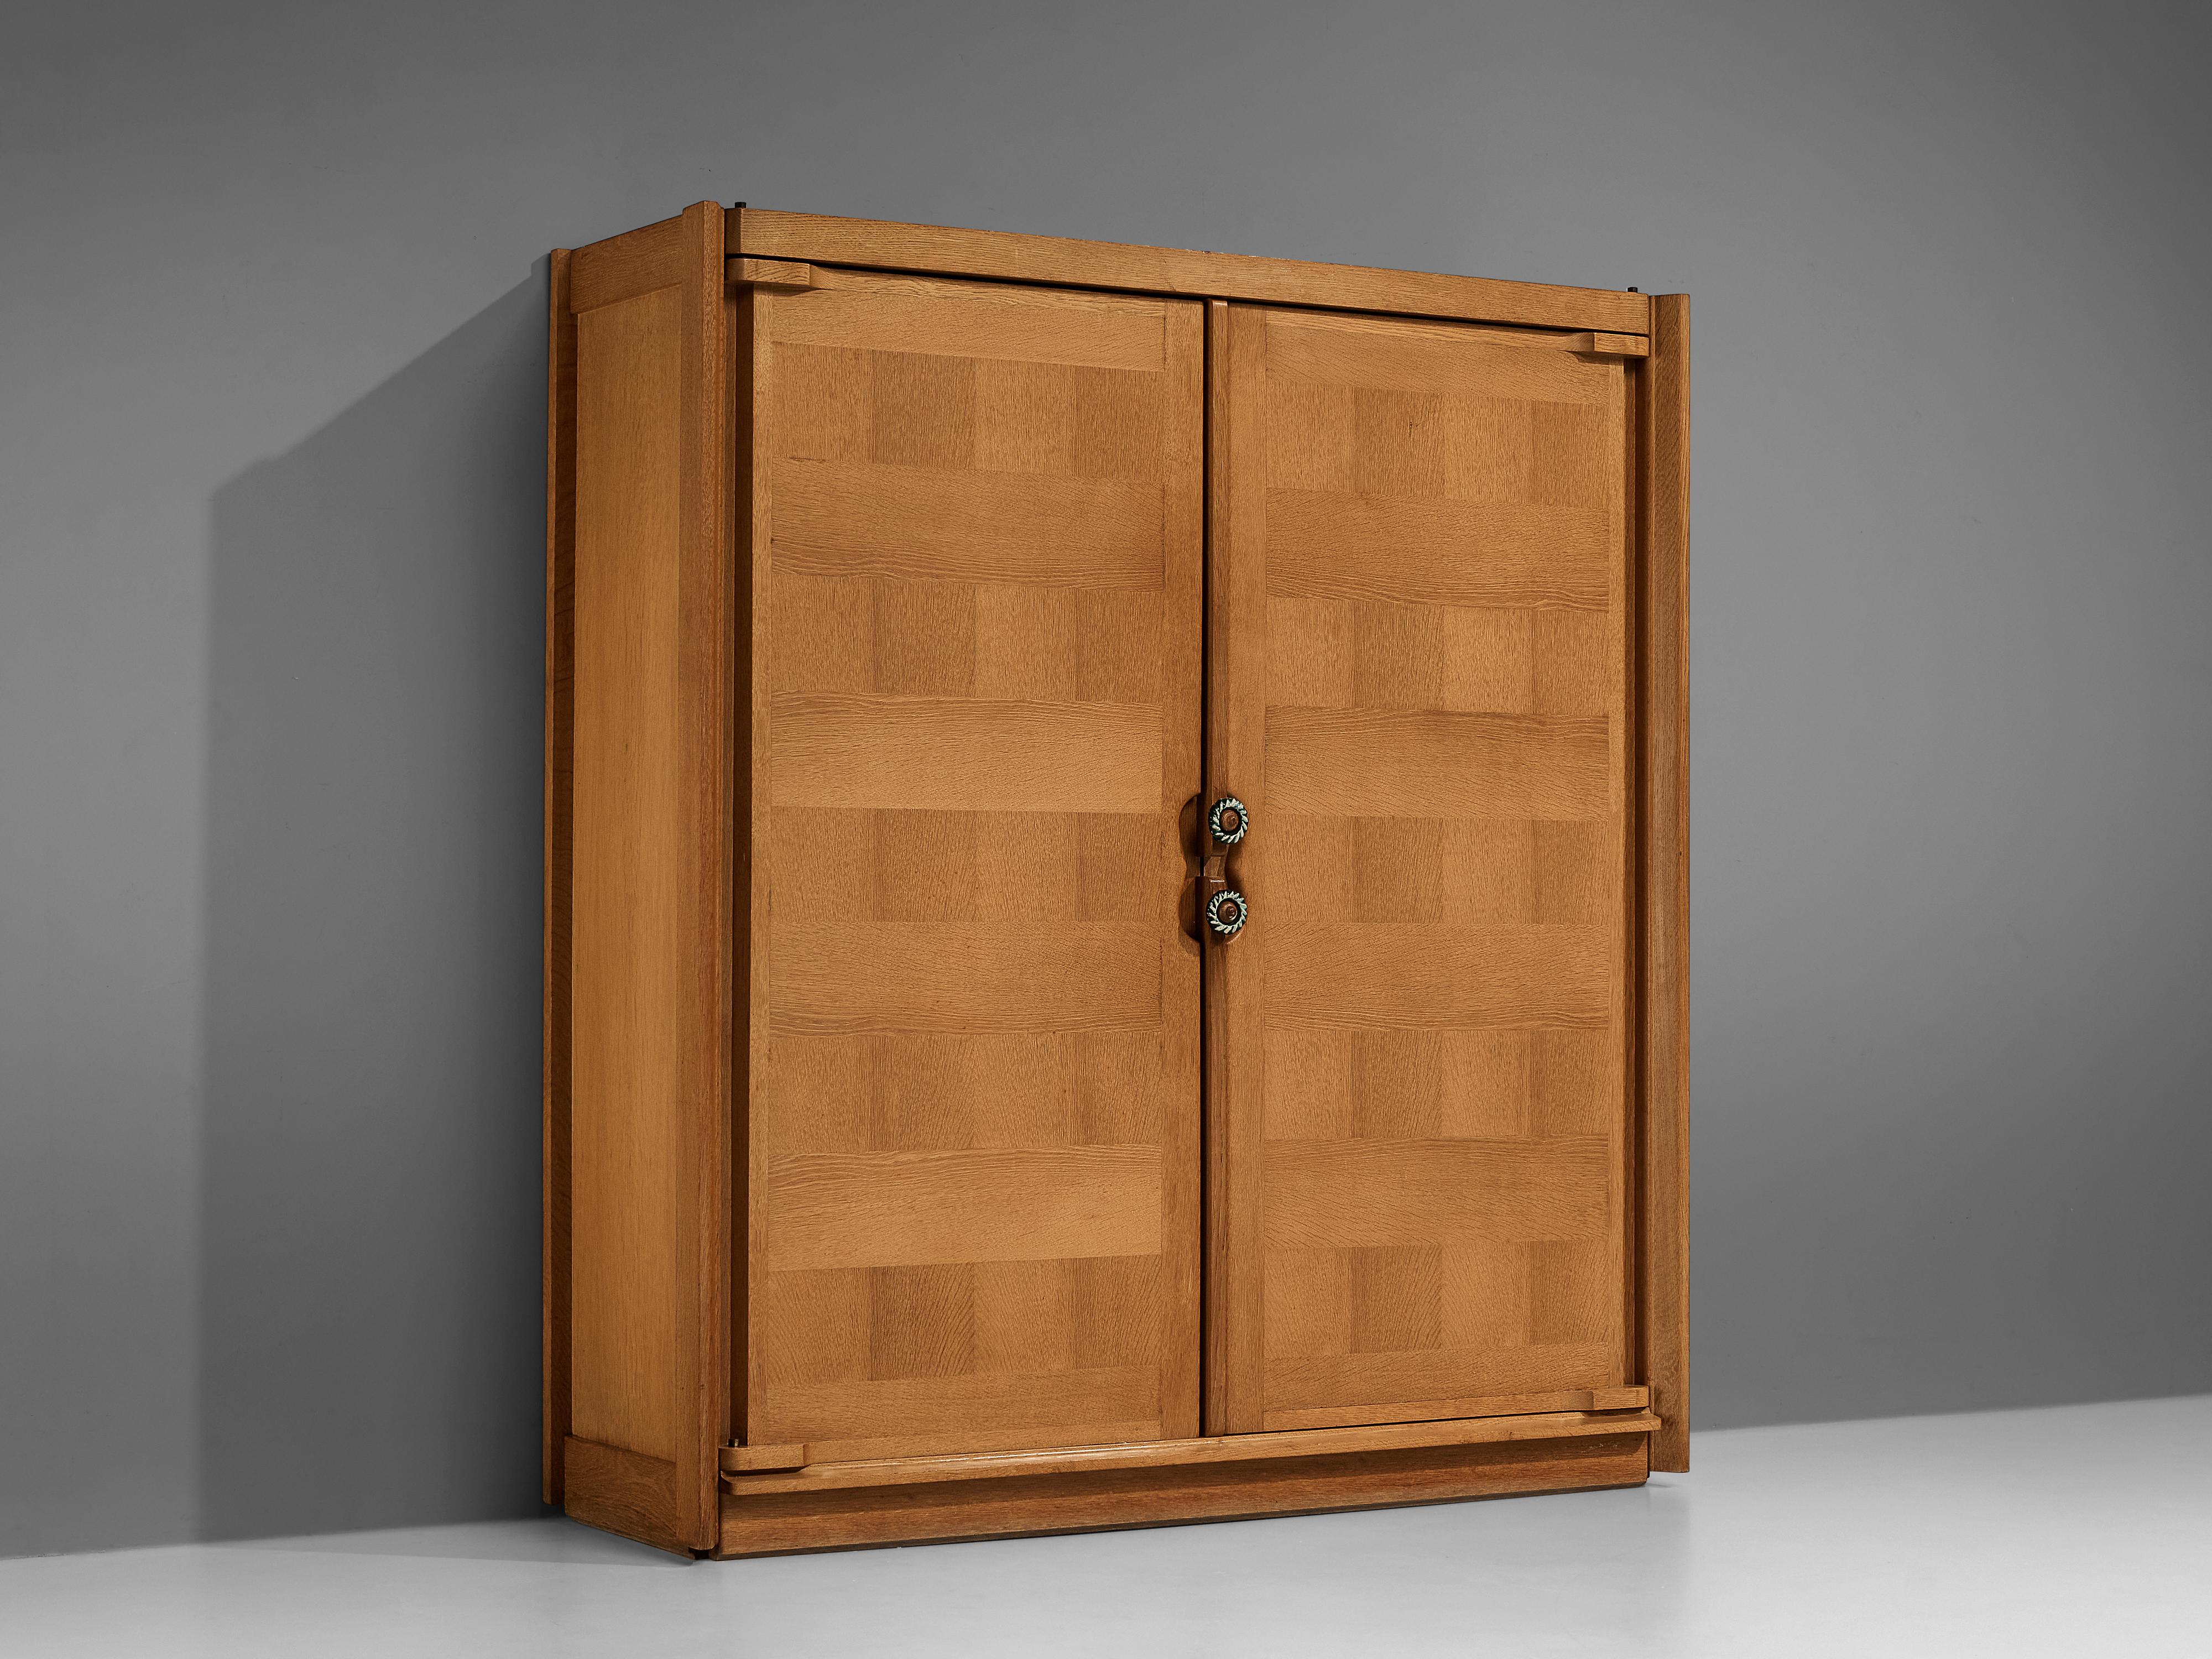 Guillerme et Chambron, armoire, oak, ceramic, France, 1960s.

This case piece is designed by Guillerme and Chambron and features geometric oak inlays, which is characteristic for the French duo. The armoire is equipped with ceramic handles. The